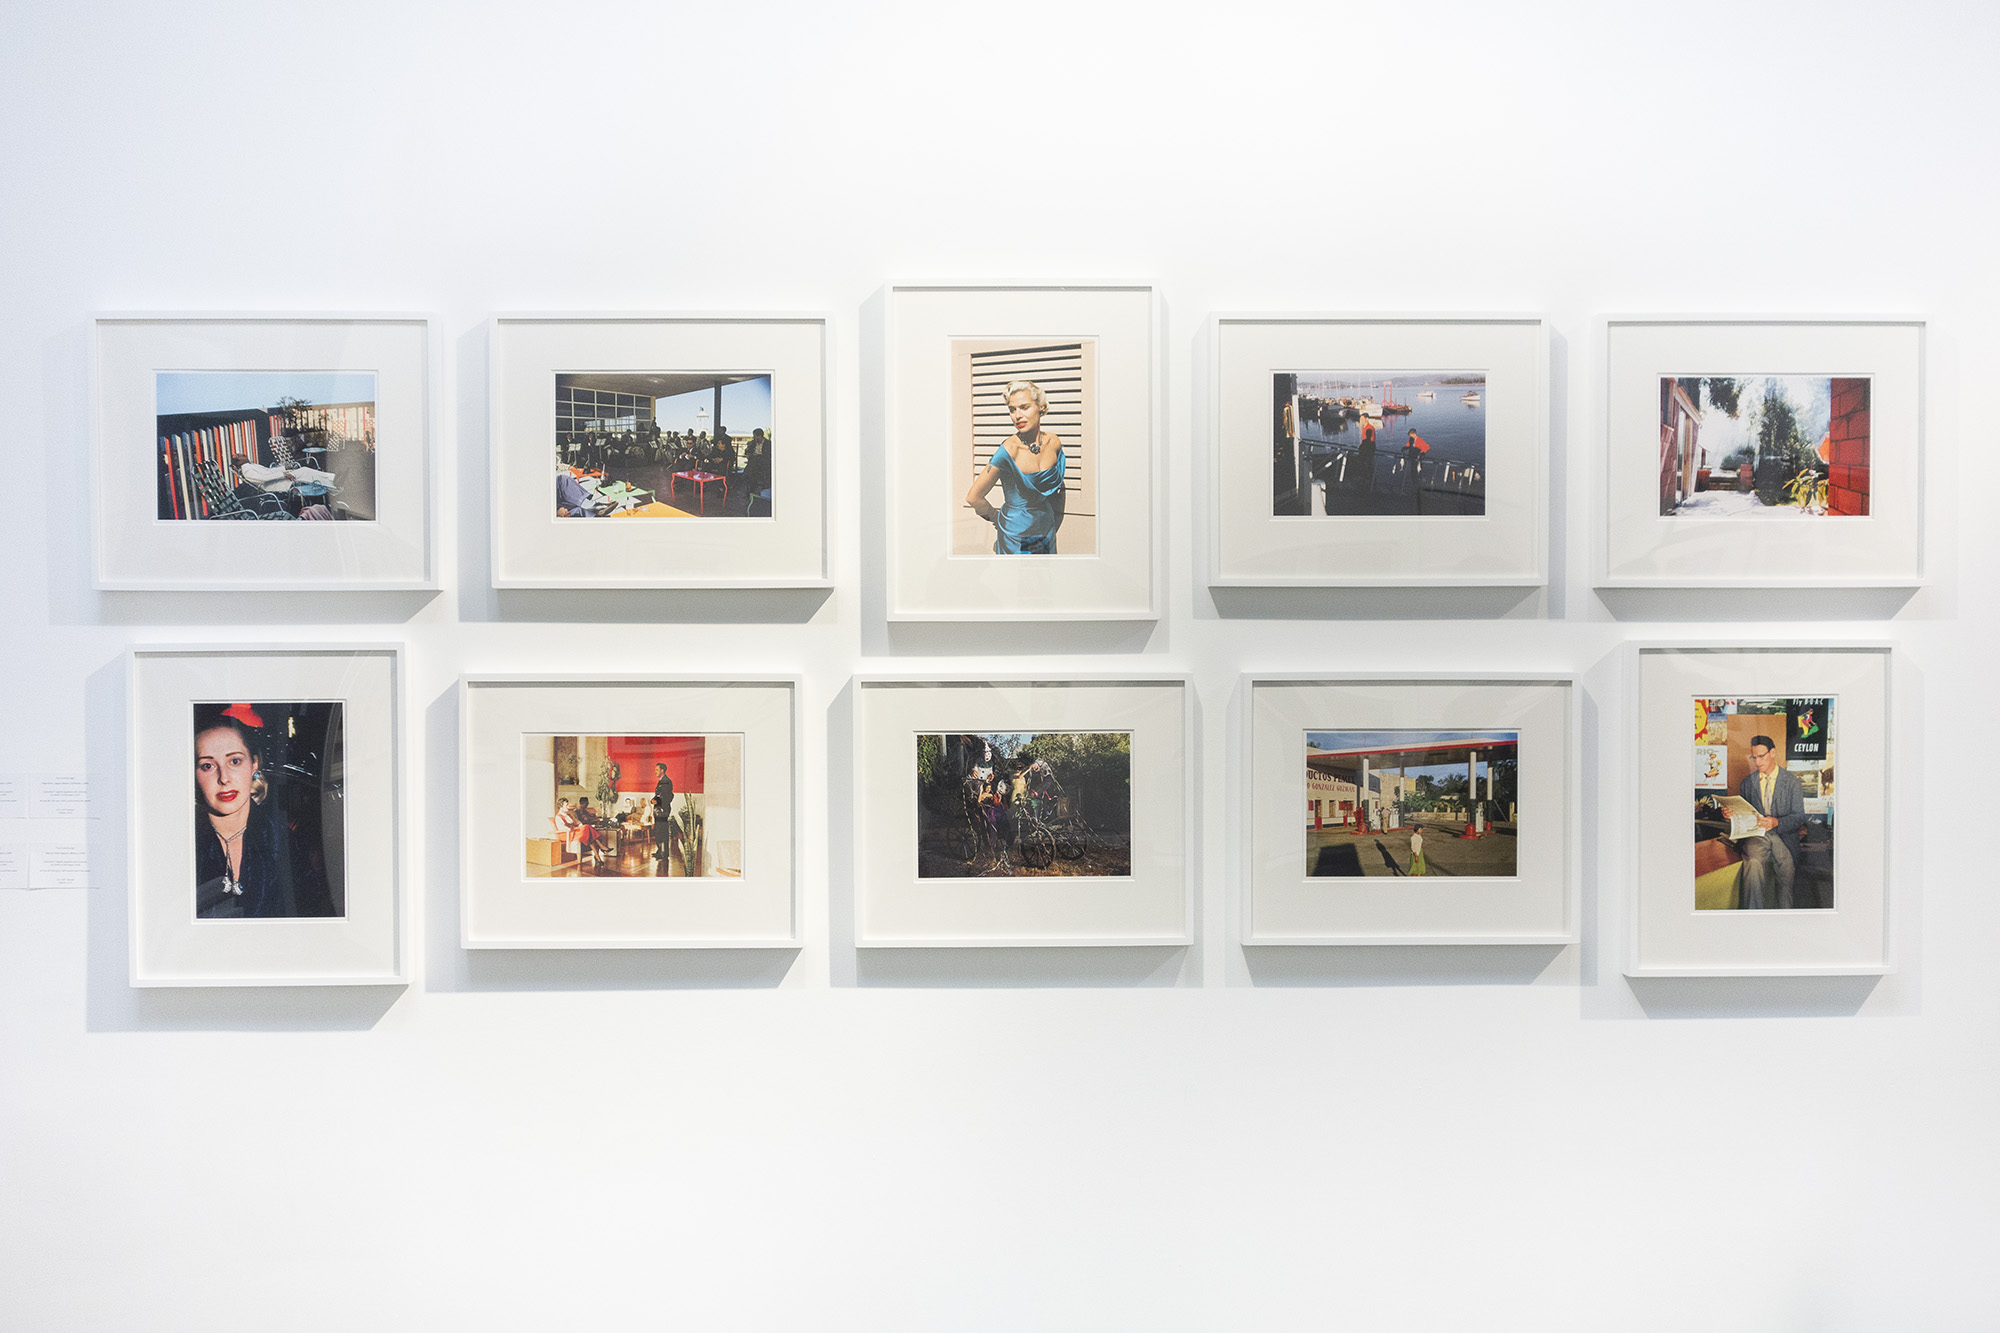 Installation view from Classic Photographs Los Angeles, 2018